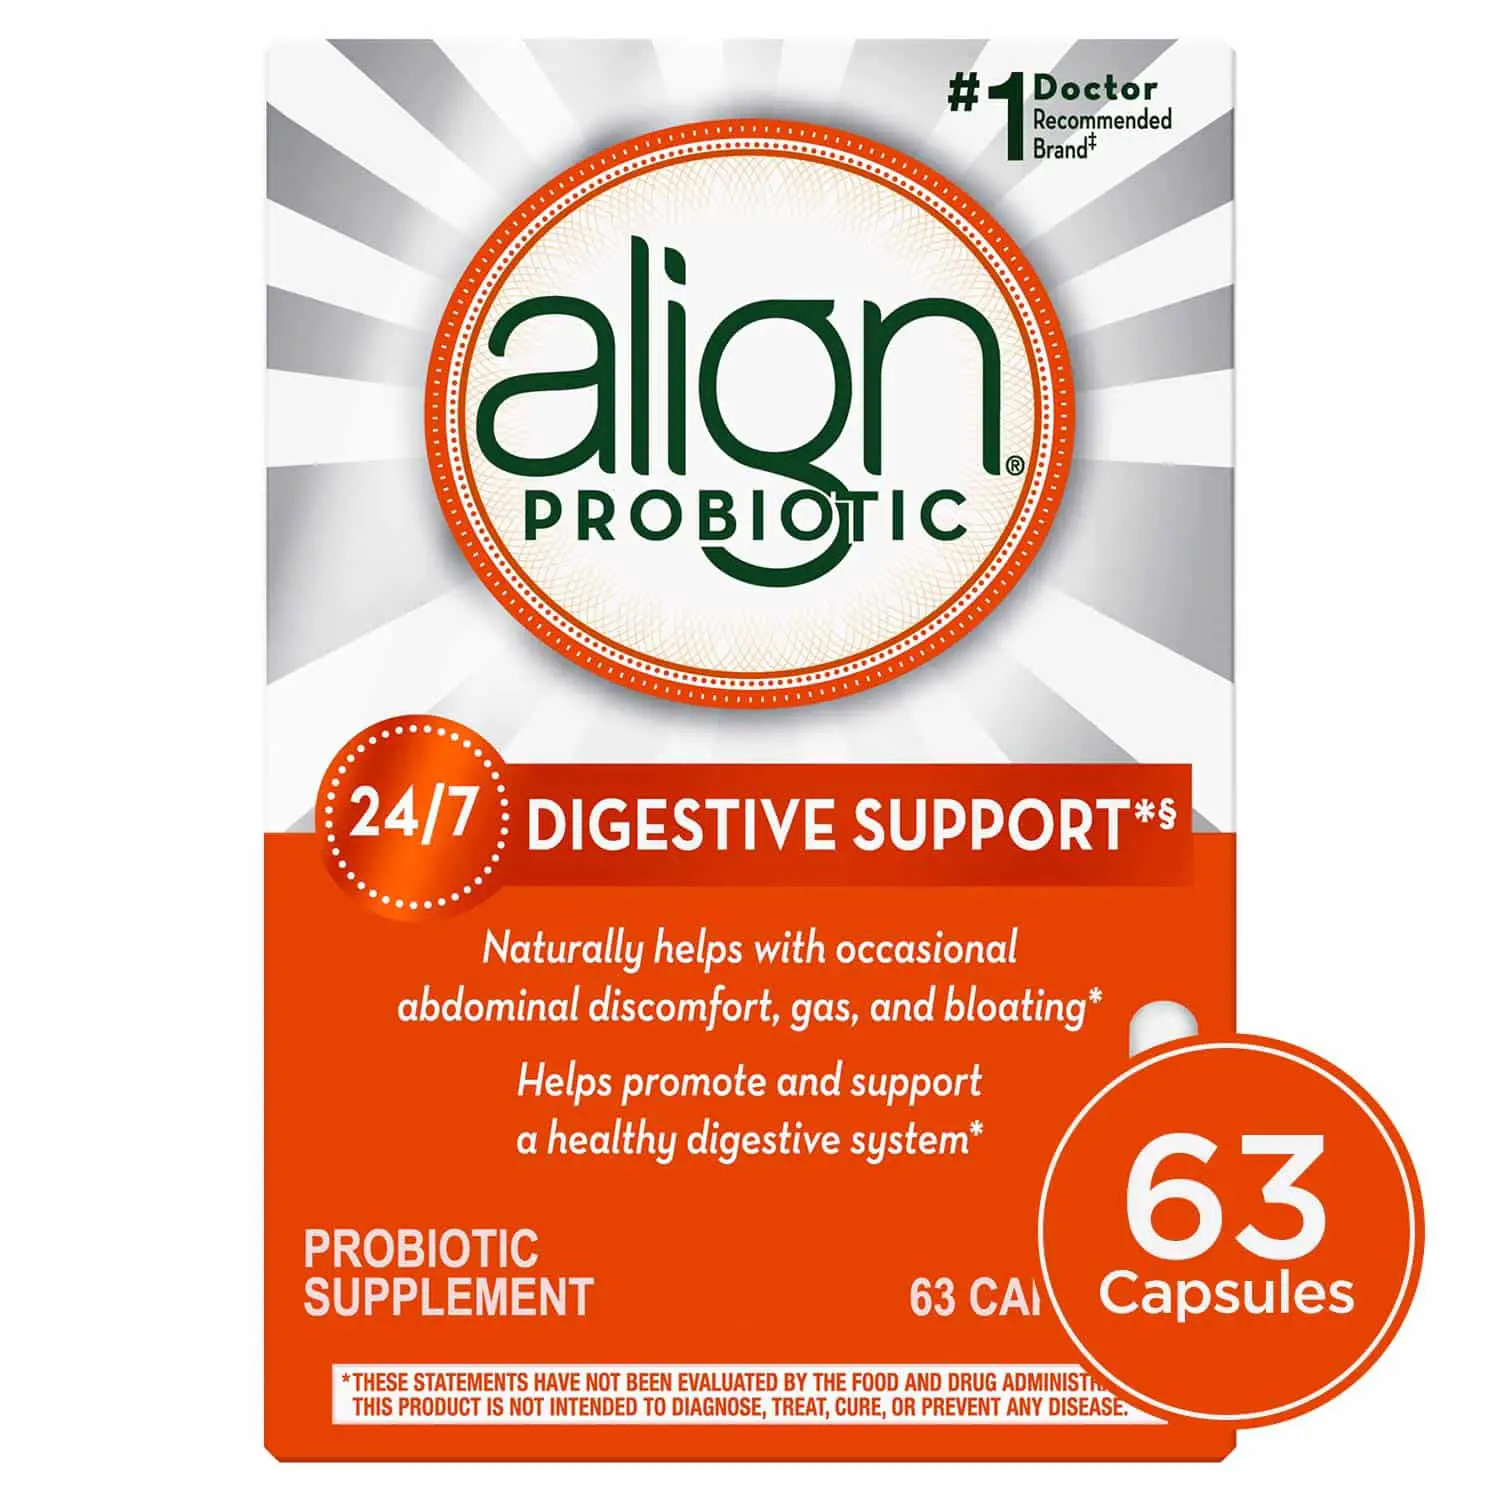 Align Probiotic â¢ The Great Gut Protector and Digestive Support